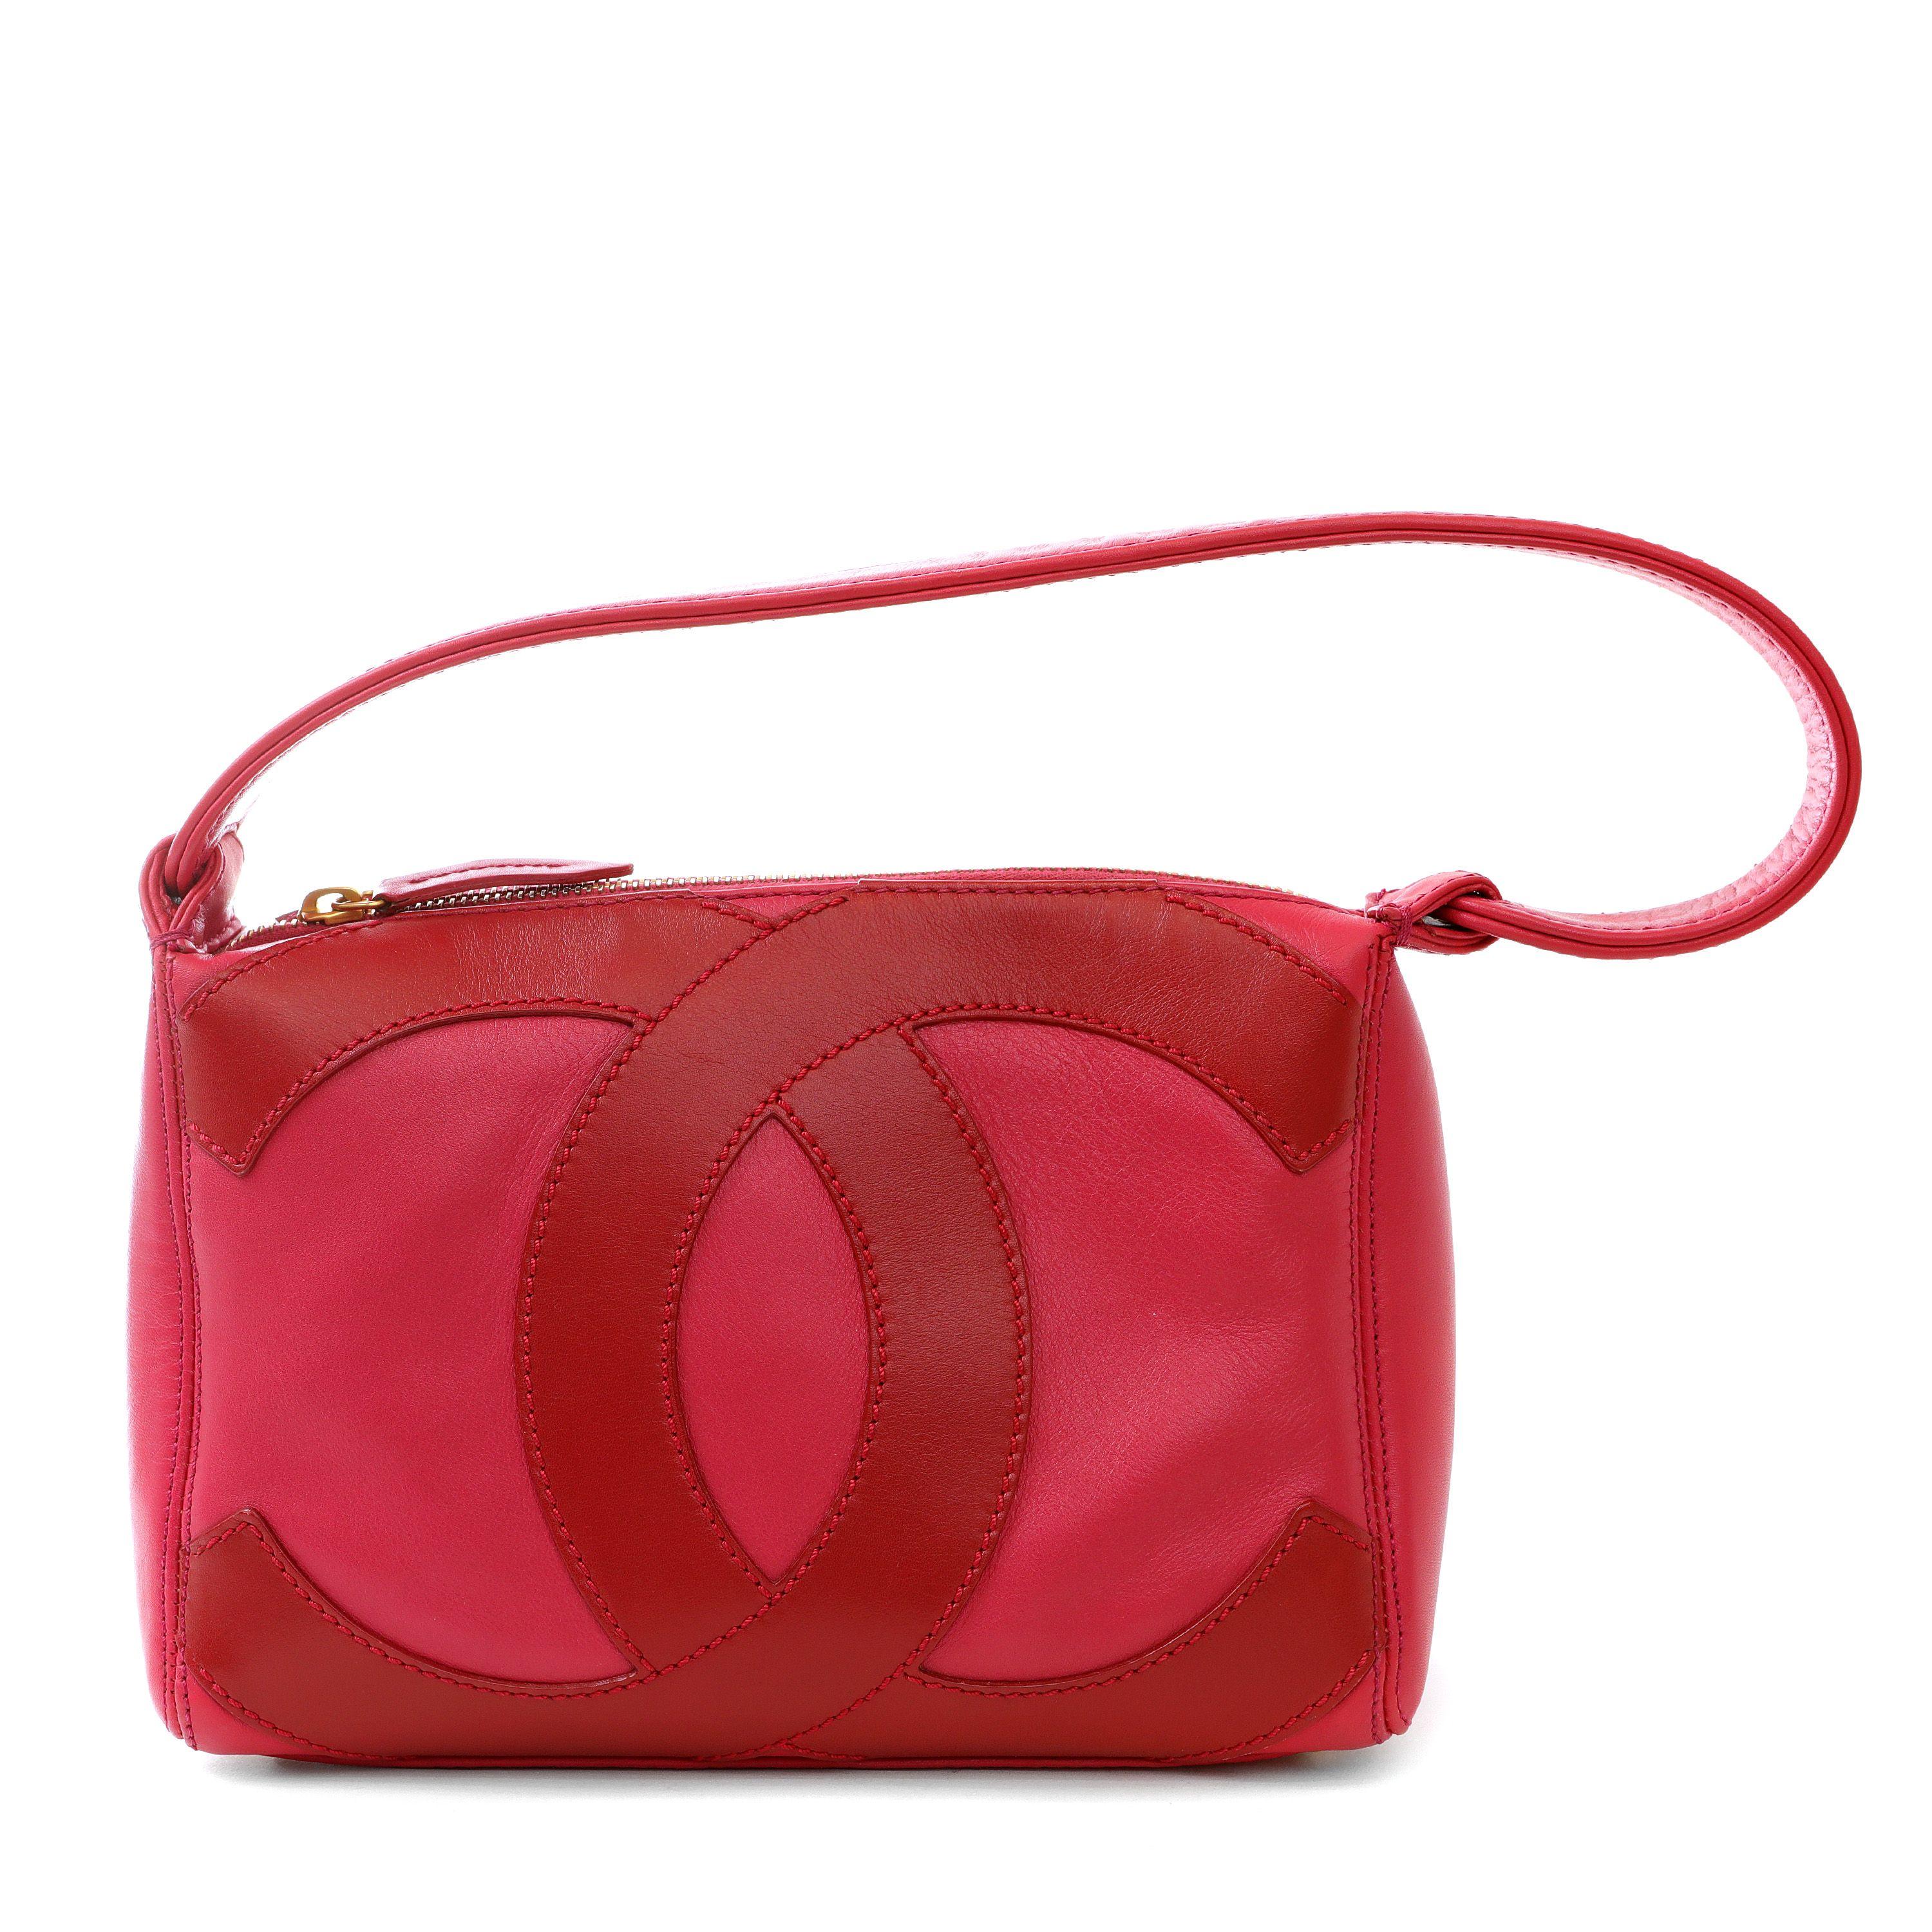 Chanel Vintage Pink and Red Lambskin CC Shoulder Bag In Good Condition For Sale In Palm Beach, FL